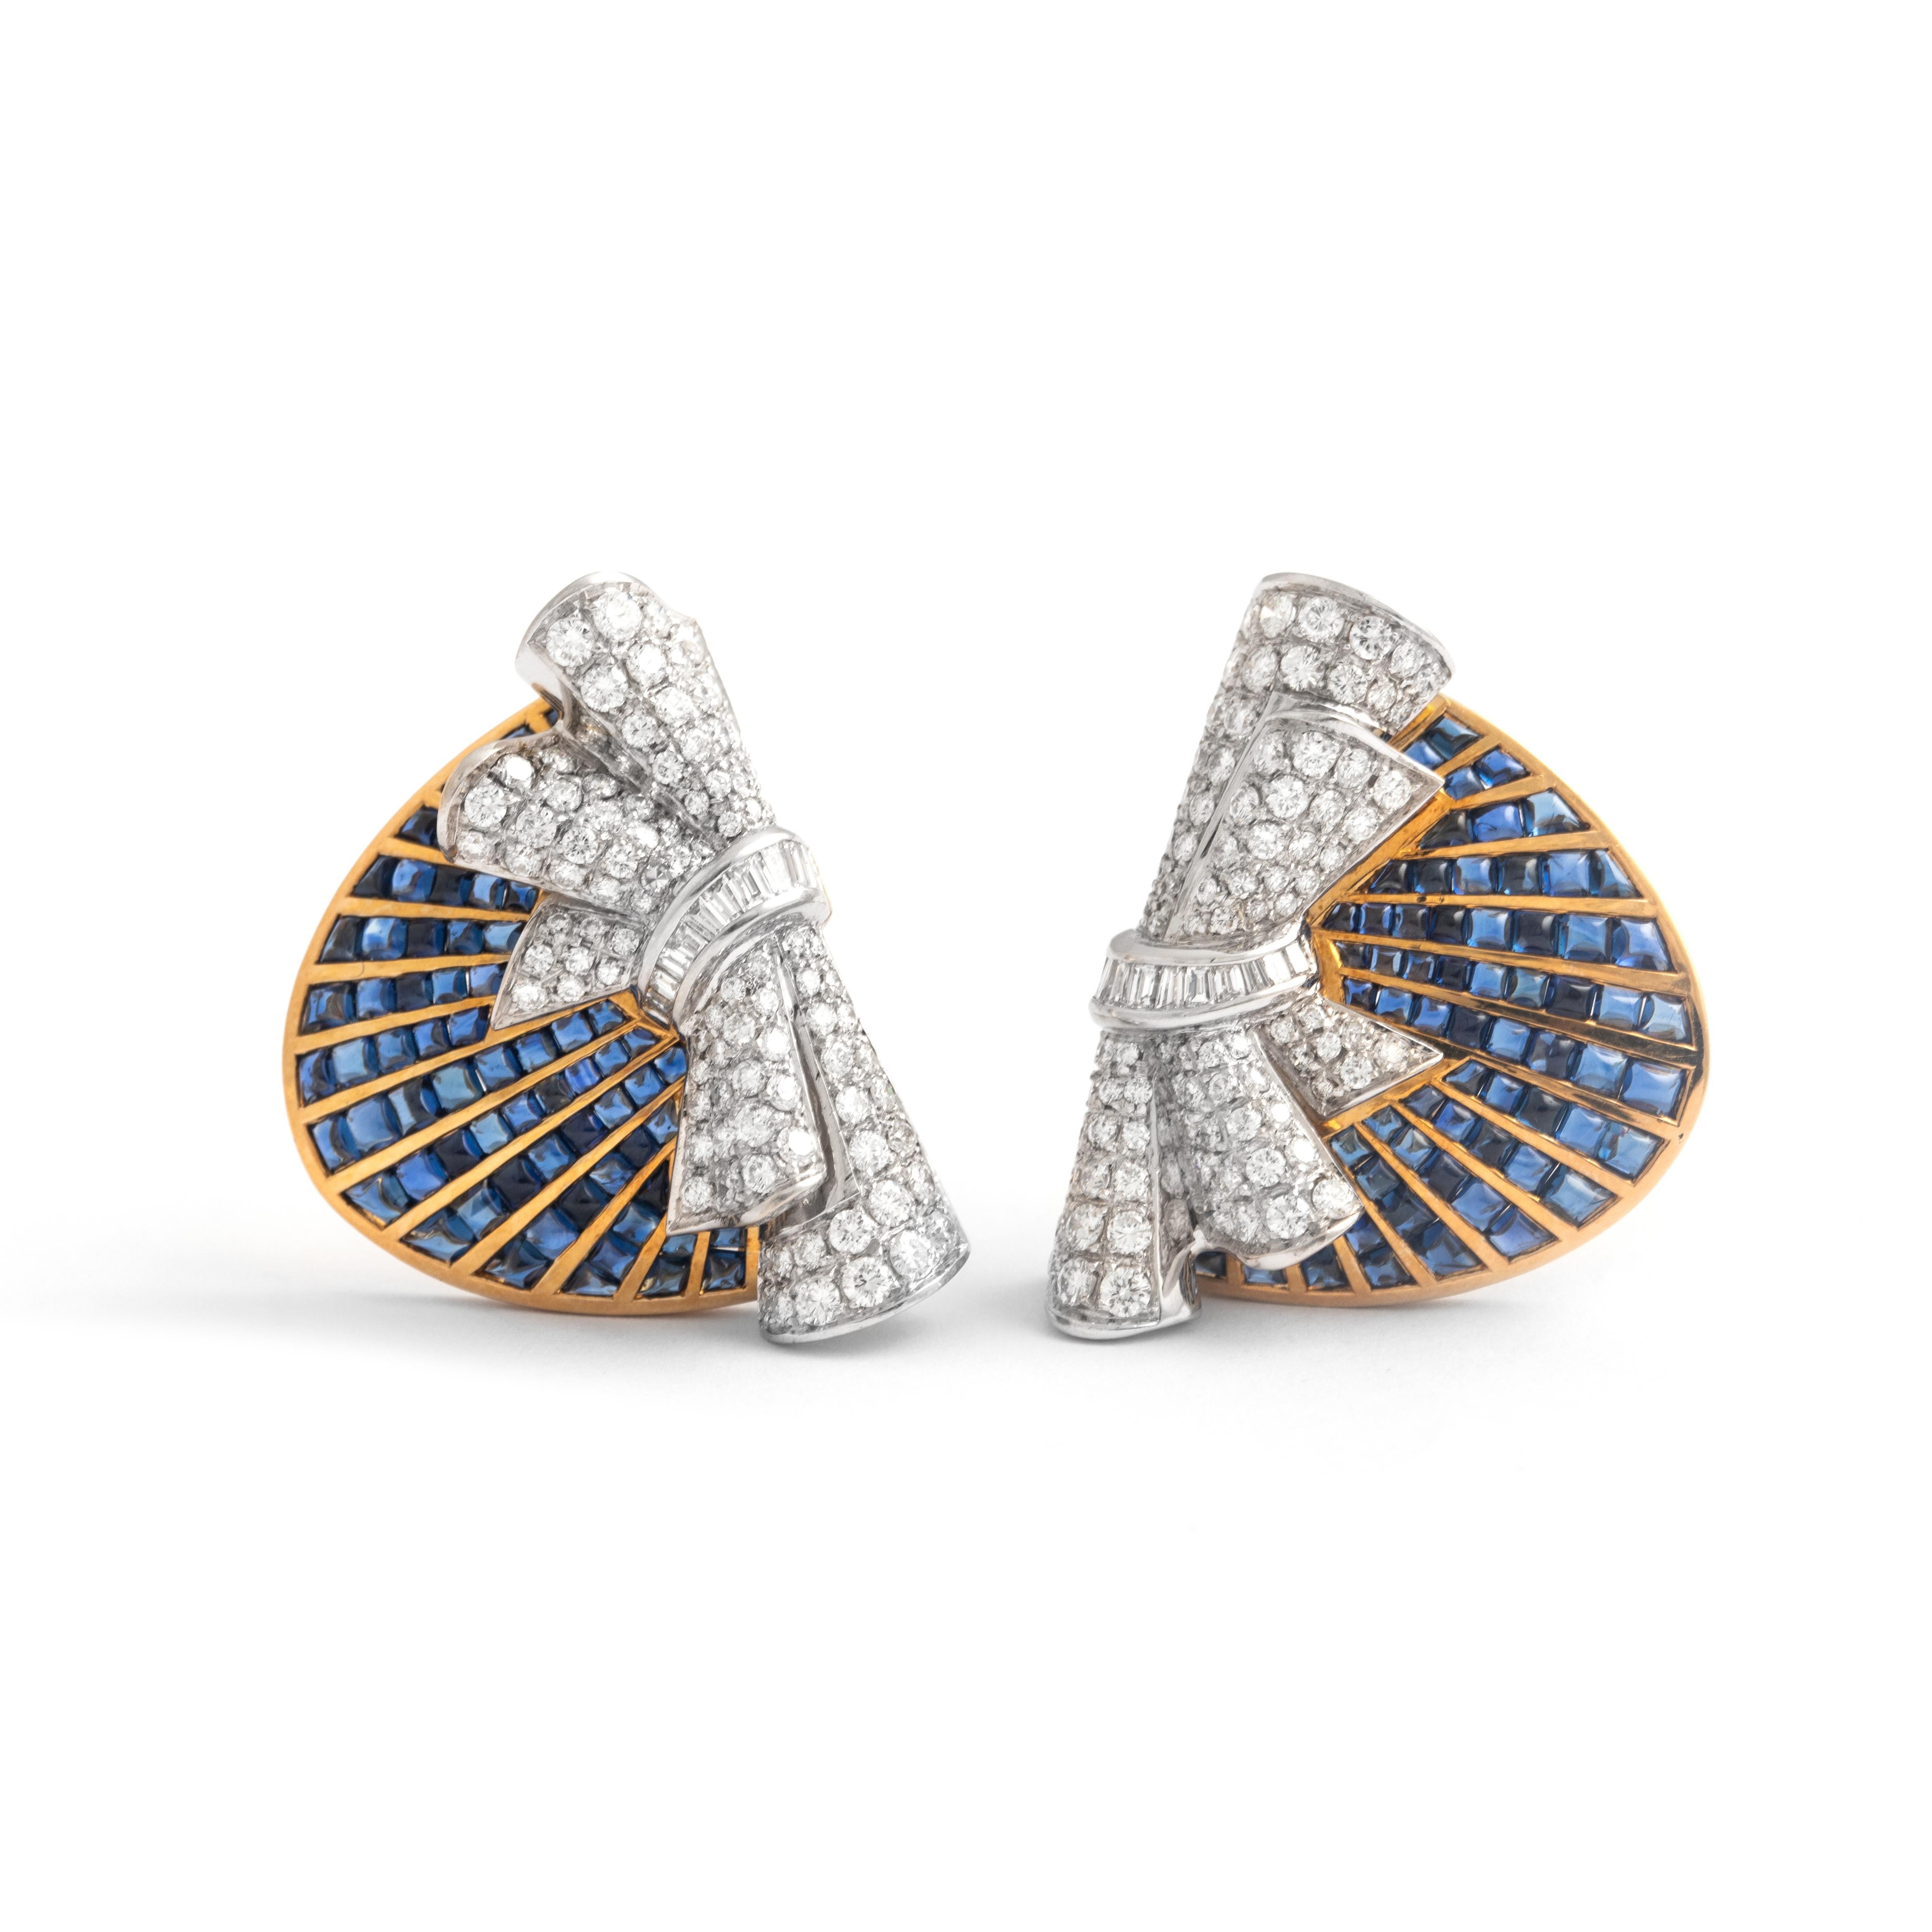 Retro Diamond Calibrated Sapphire Yellow and White Gold EarClips Earrings.
Circa 1970.

Dimensions: 
Height: 3.00 centimeters
Width: 2.50 centimeters
Thickness: 0.20 centimeters up to 1.00 centimeters

Total weight: 31.82 grams